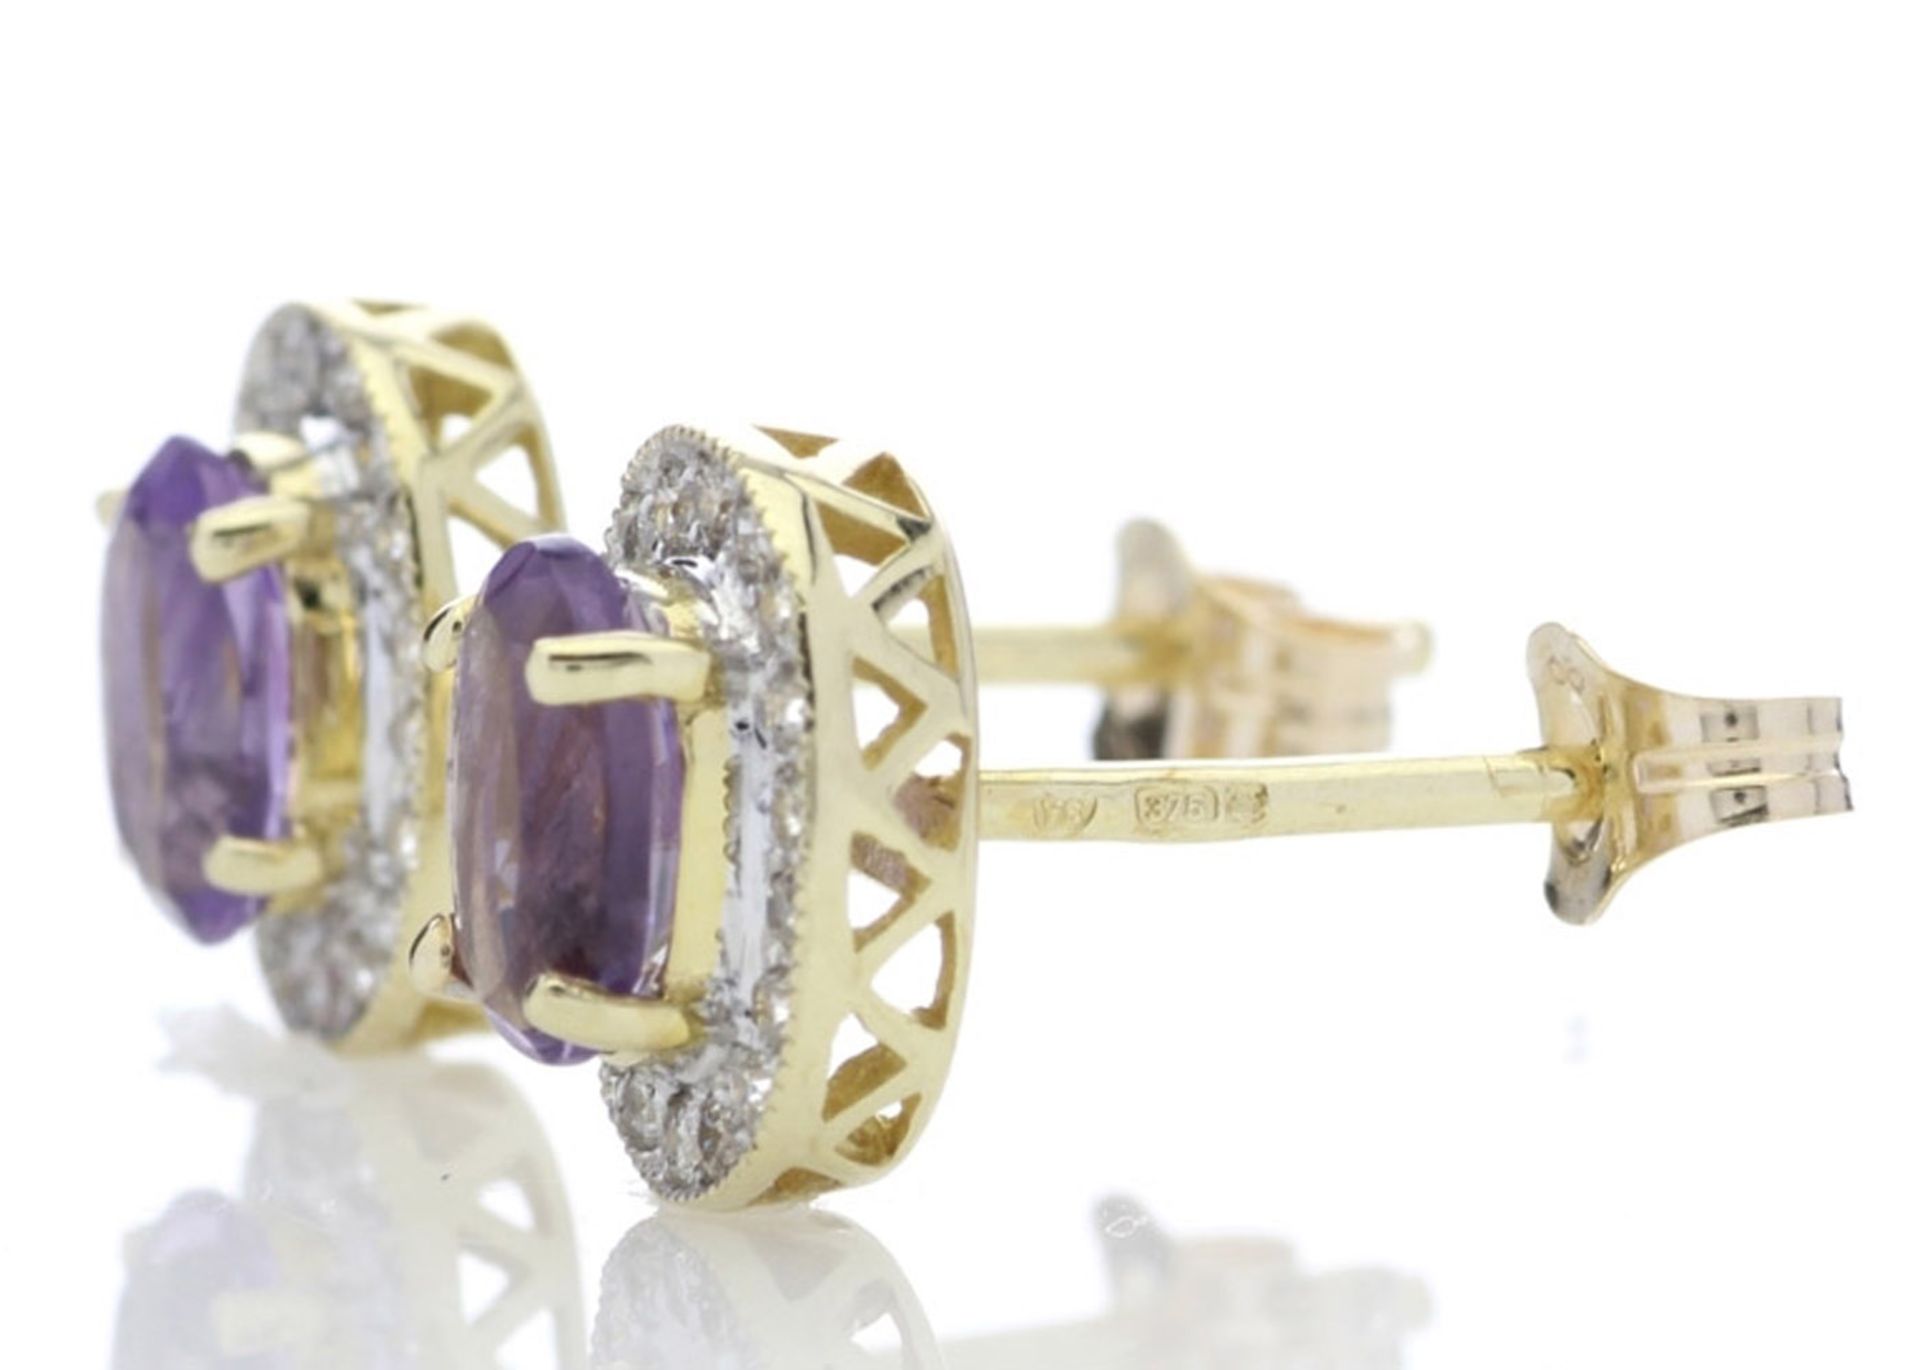 9ct Yellow Gold Amethyst and Diamond Cluster Earring 0.18 Carats - Valued by GIE £1,879.00 - 9ct - Image 6 of 7